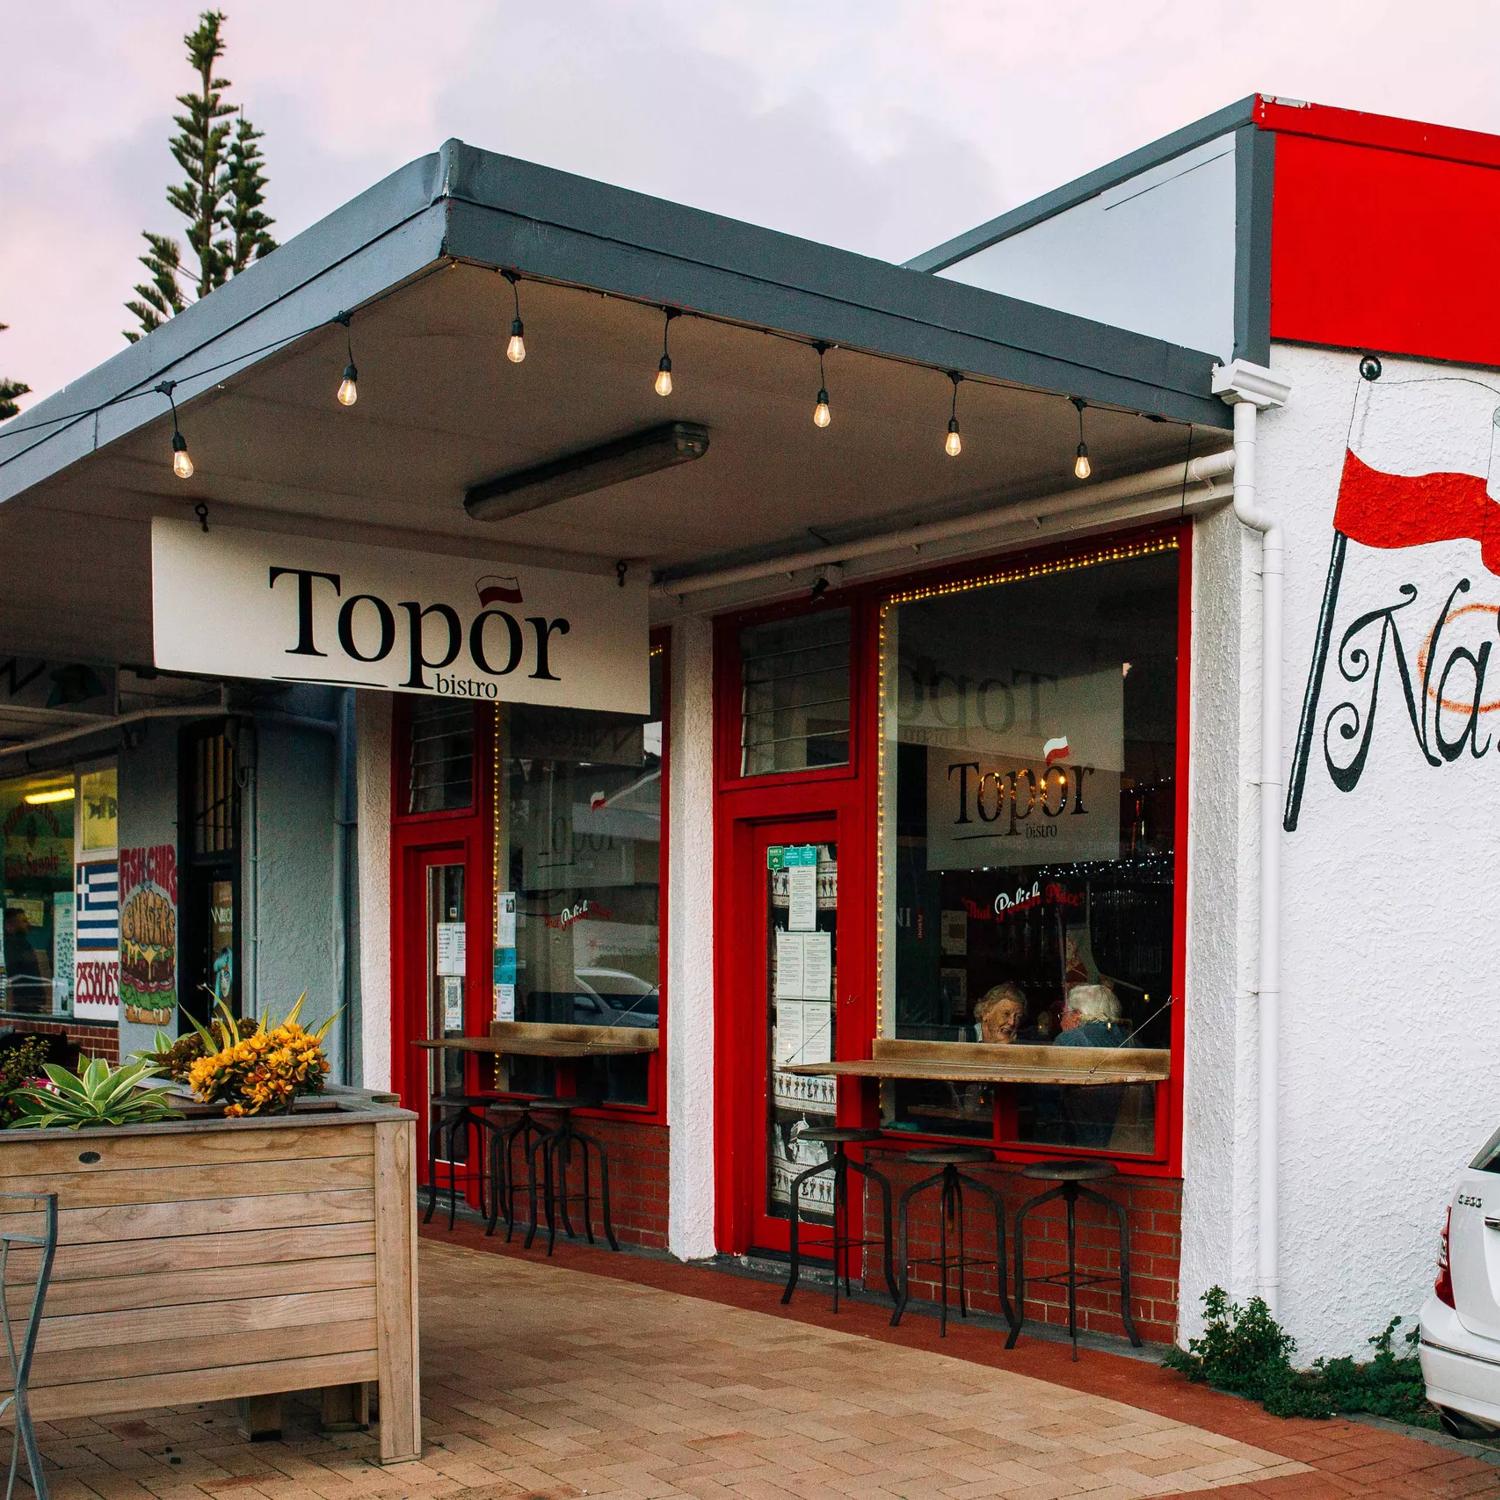 The exterior of Topor Bistro, a Polish restaurant in Porirua, New Zealand. The small white building has hanging lights and red accents. 